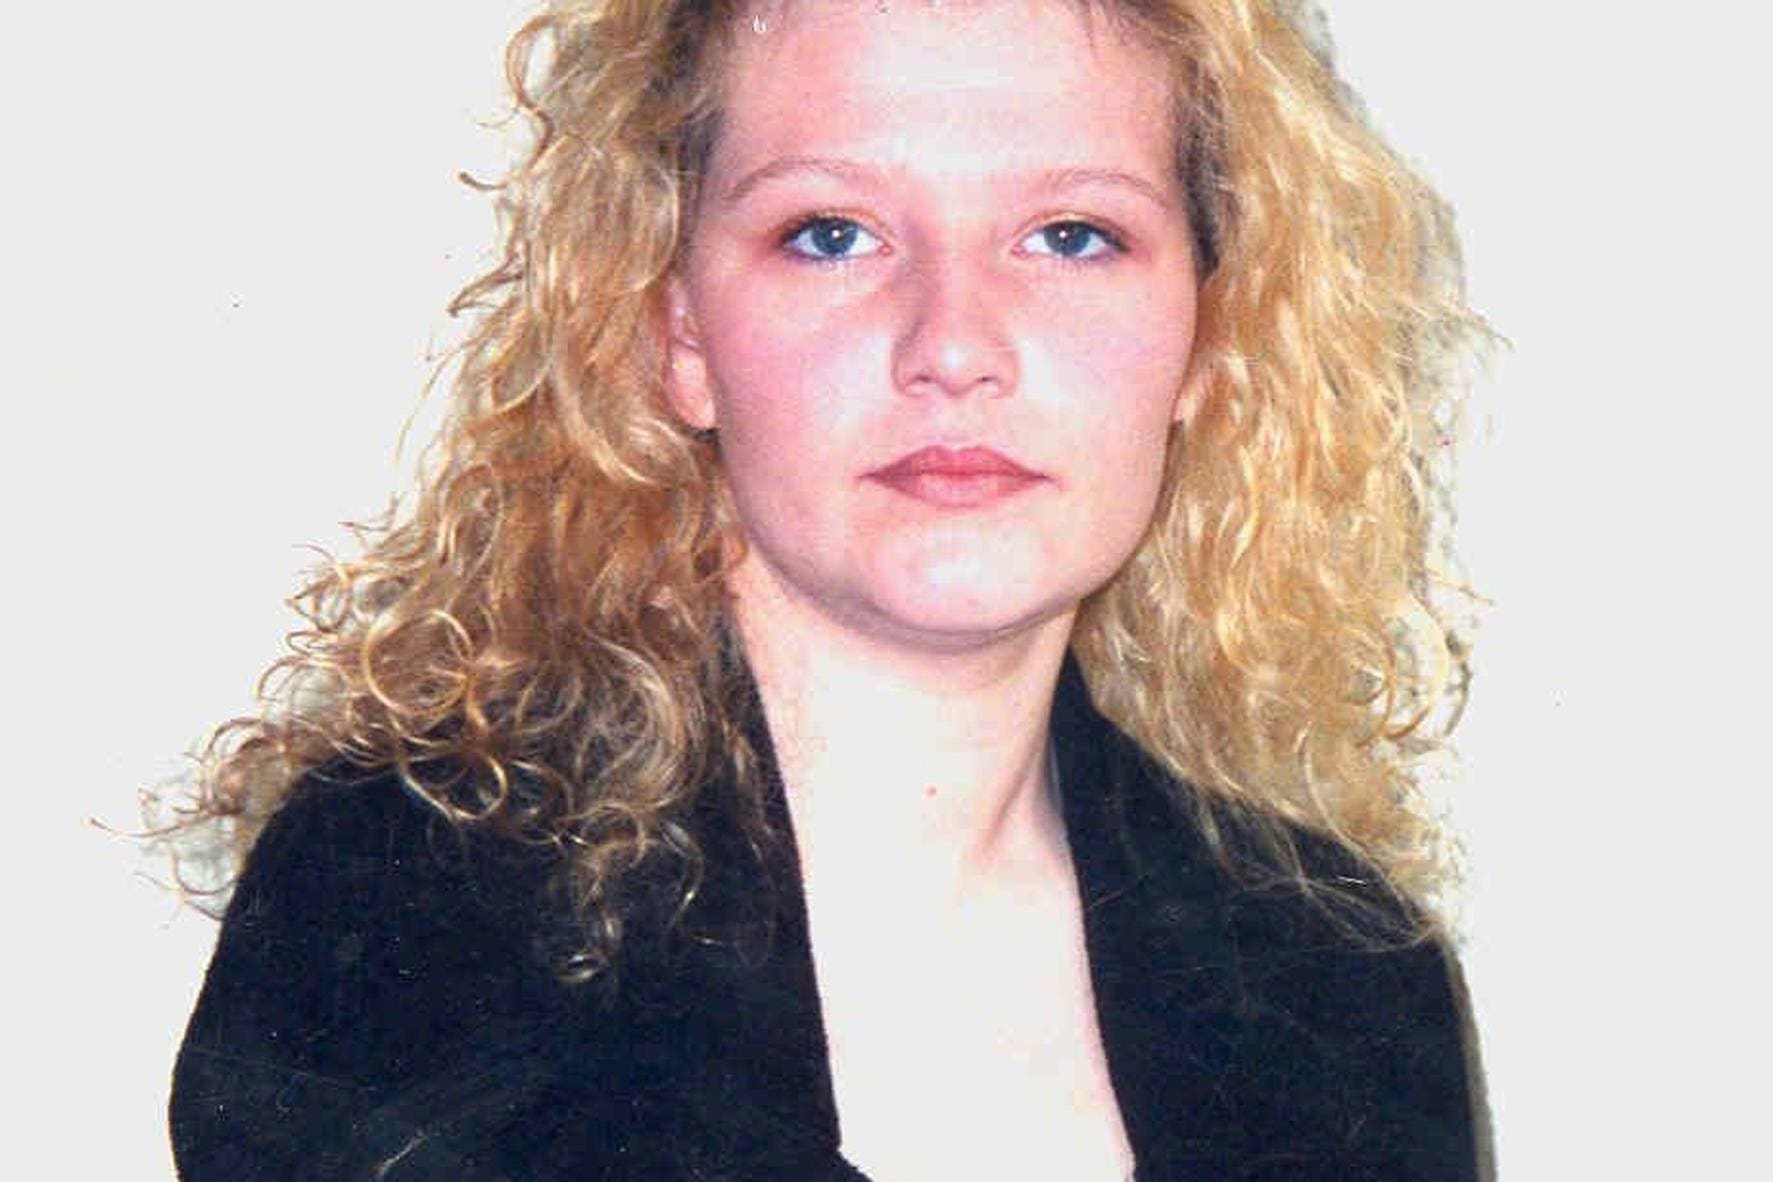 Emma Caldwell’s body was discovered in woodland in 2005 (Handout/Police Scotland/PA)